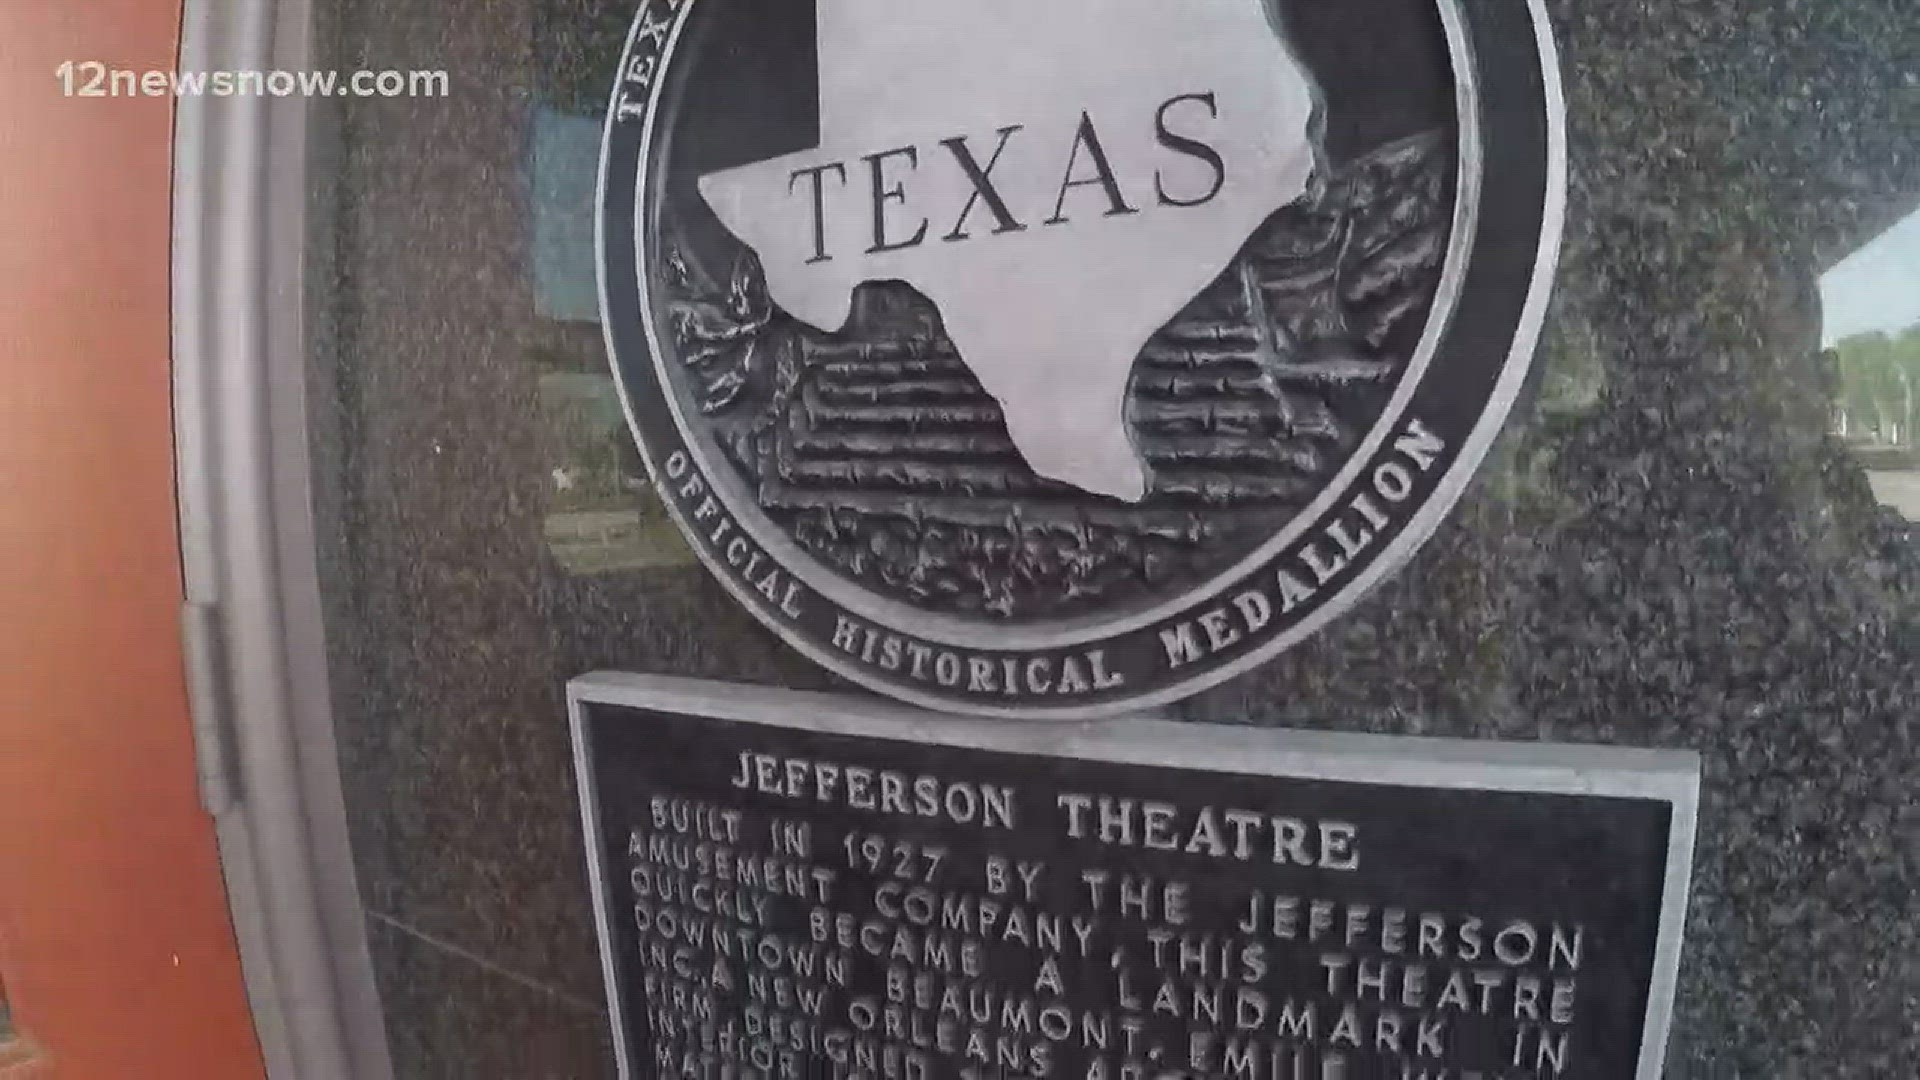 The historic Jefferson Theatre will close for repairs from June until September.